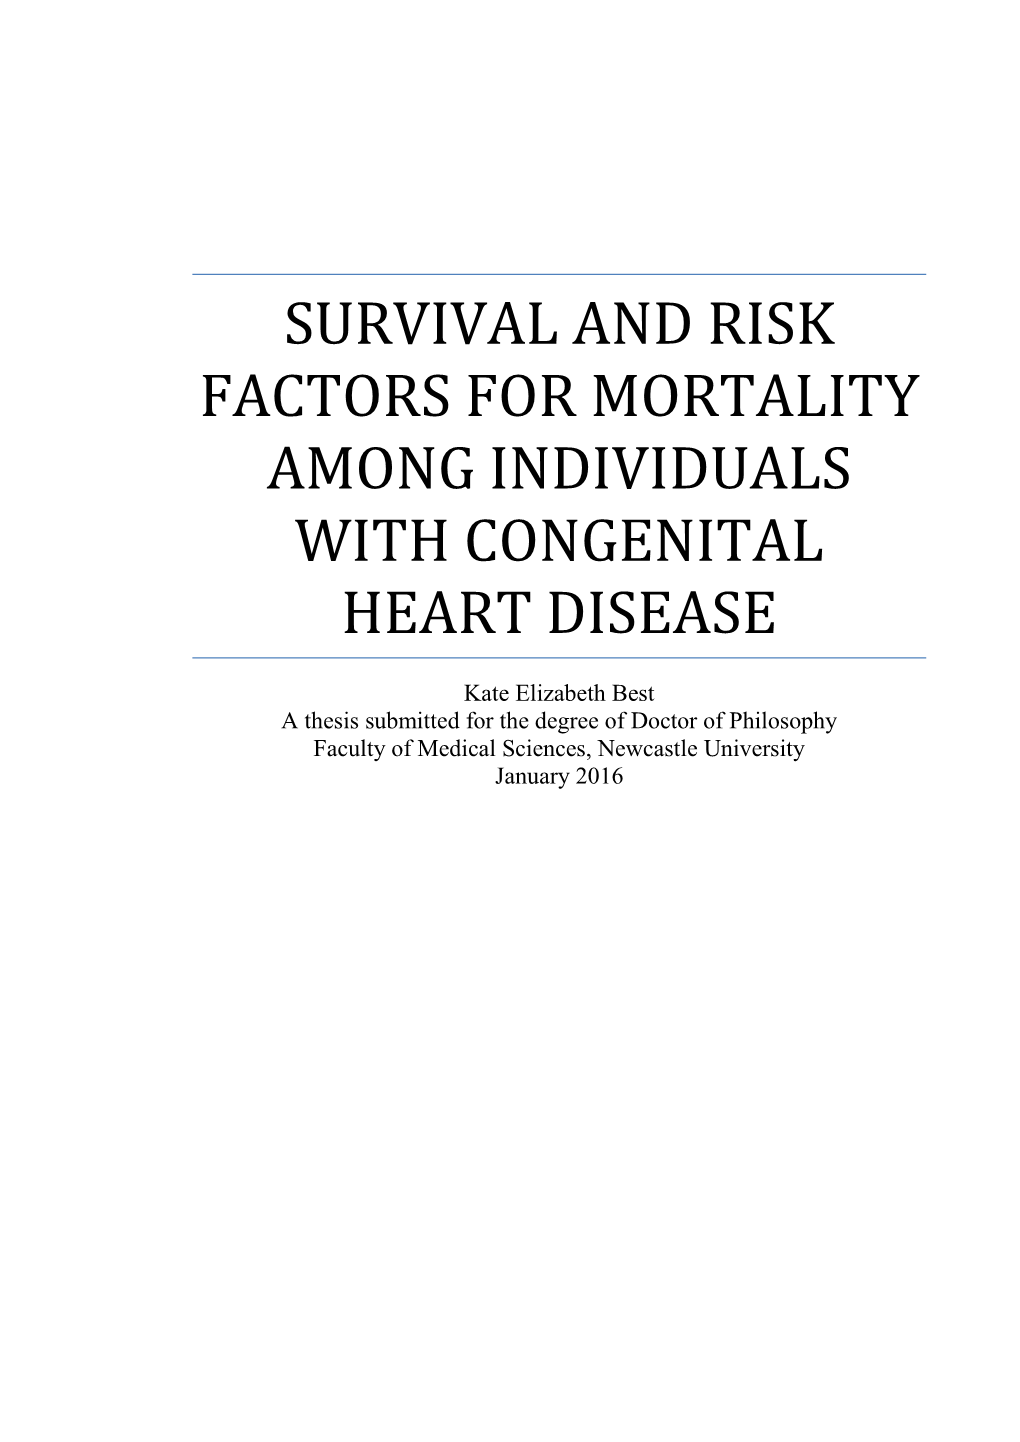 Survival and Risk Factors for Mortality Among Individuals with Congenital Heart Disease